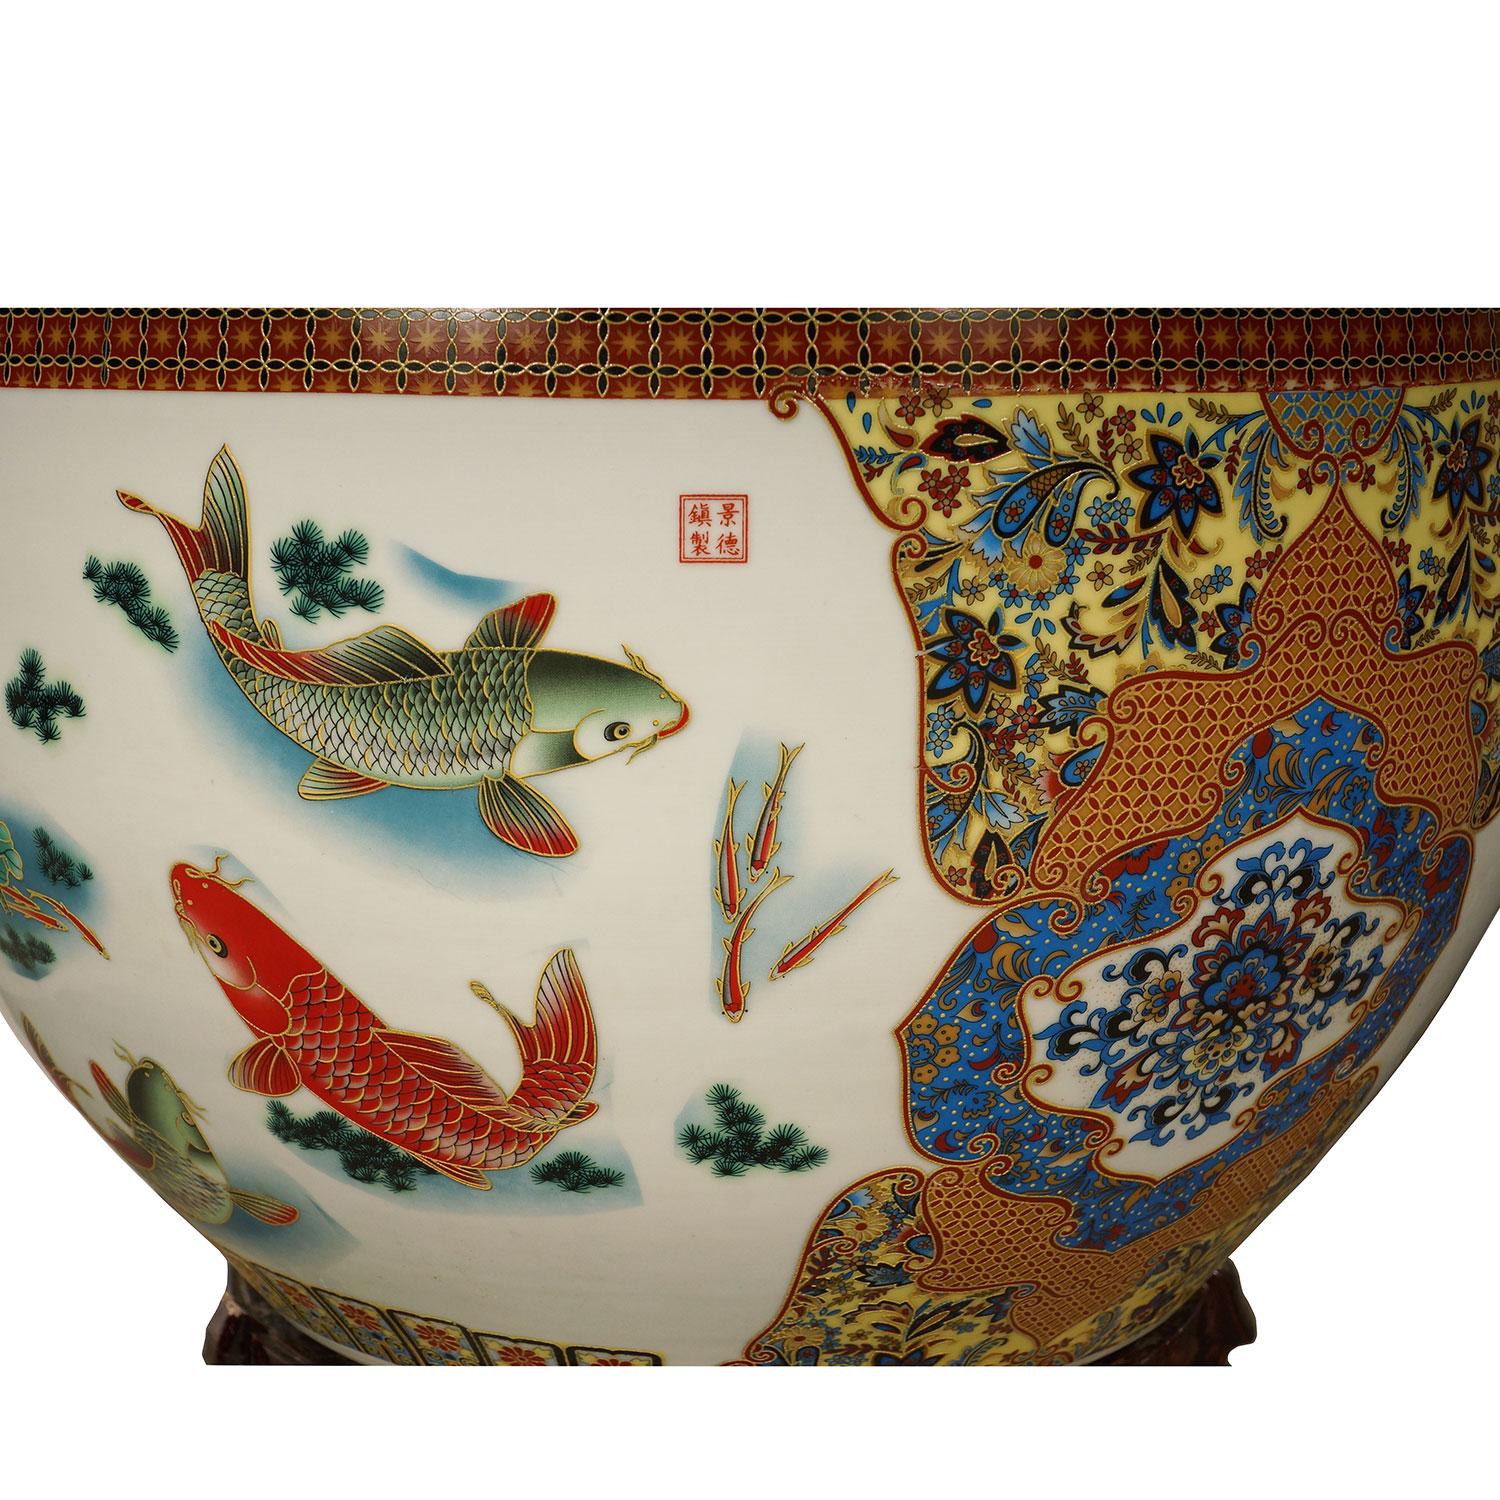 Painted Early 20th Century Antique Chinese Famille Rose Porcelain Fish Bowl, Planter For Sale